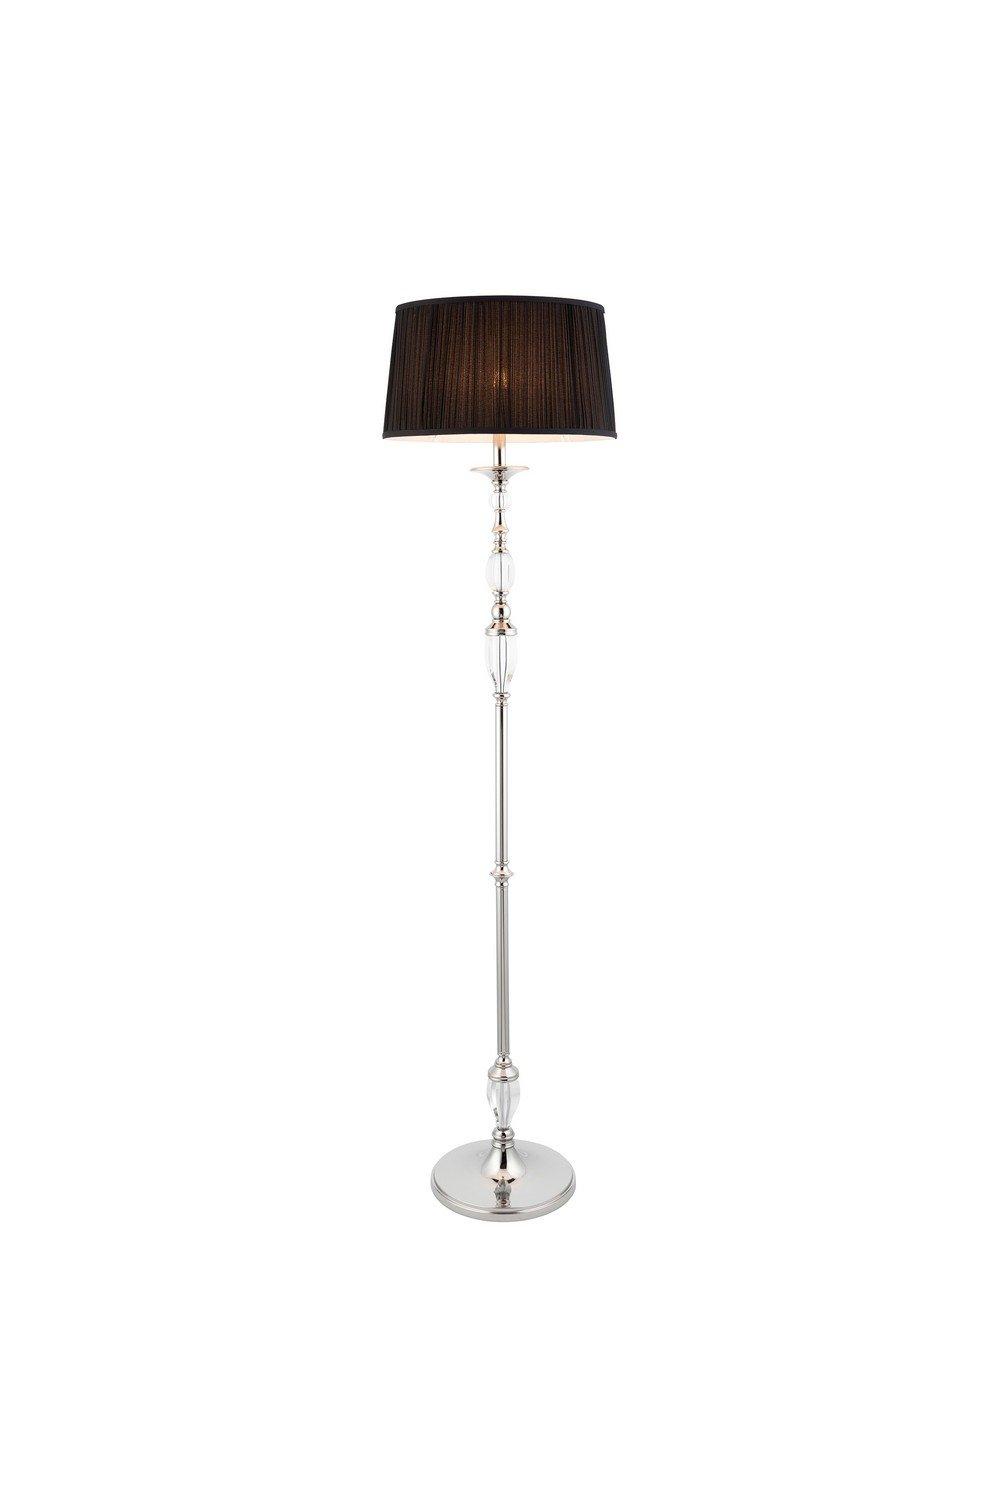 Polina 1 Light Floor Lamp Polished Nickel Plate with Black Shade E27